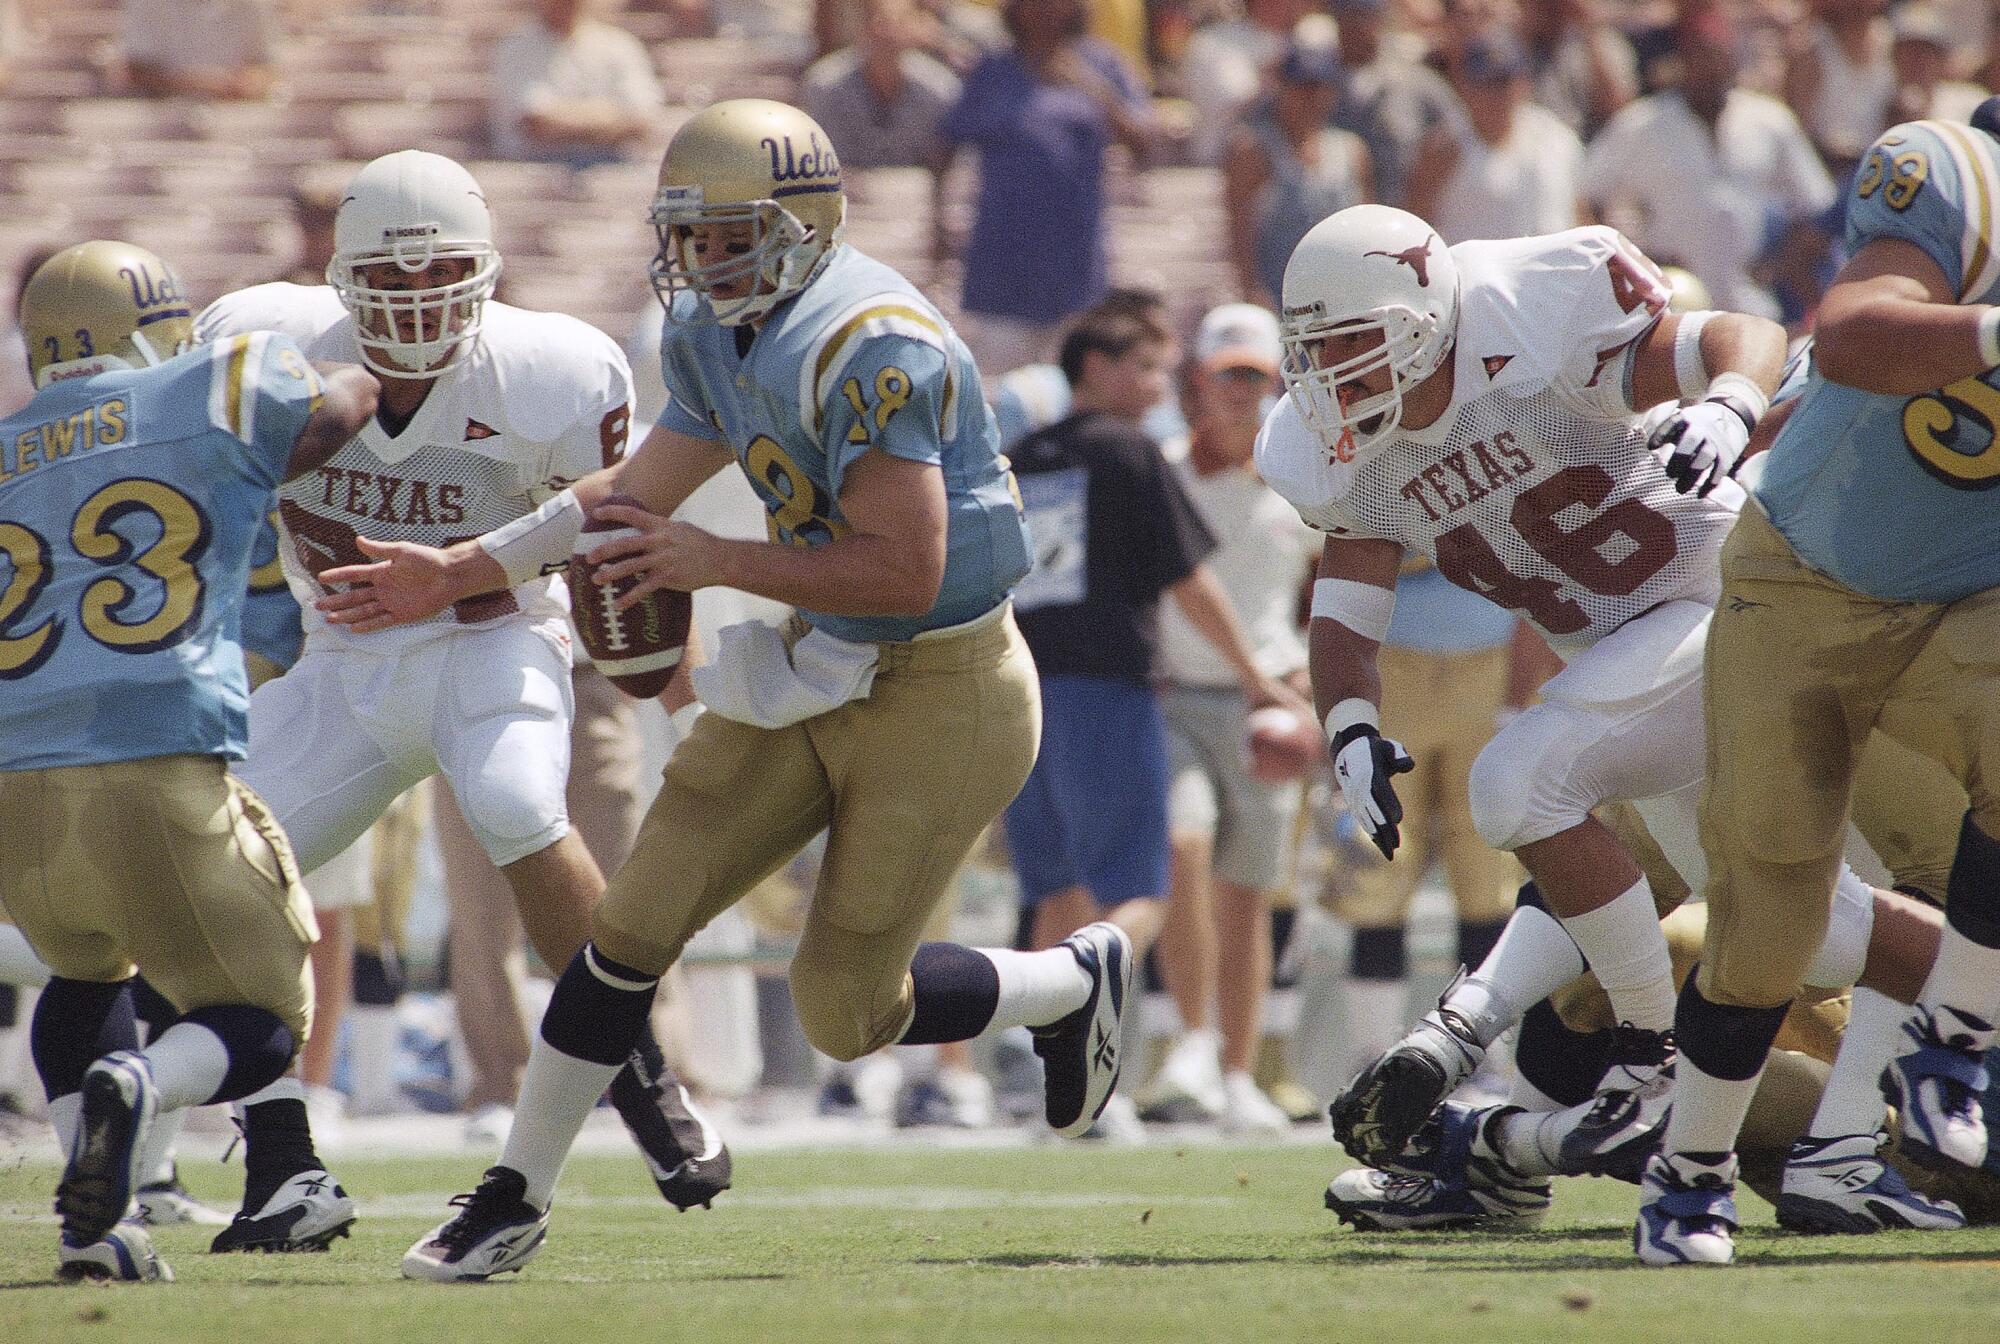 UCLA quarterback Cade McNown is chased by Texas' Dusty Renfro (46) and J.J. Kelly (84) during a game on Sept. 12, 1998.